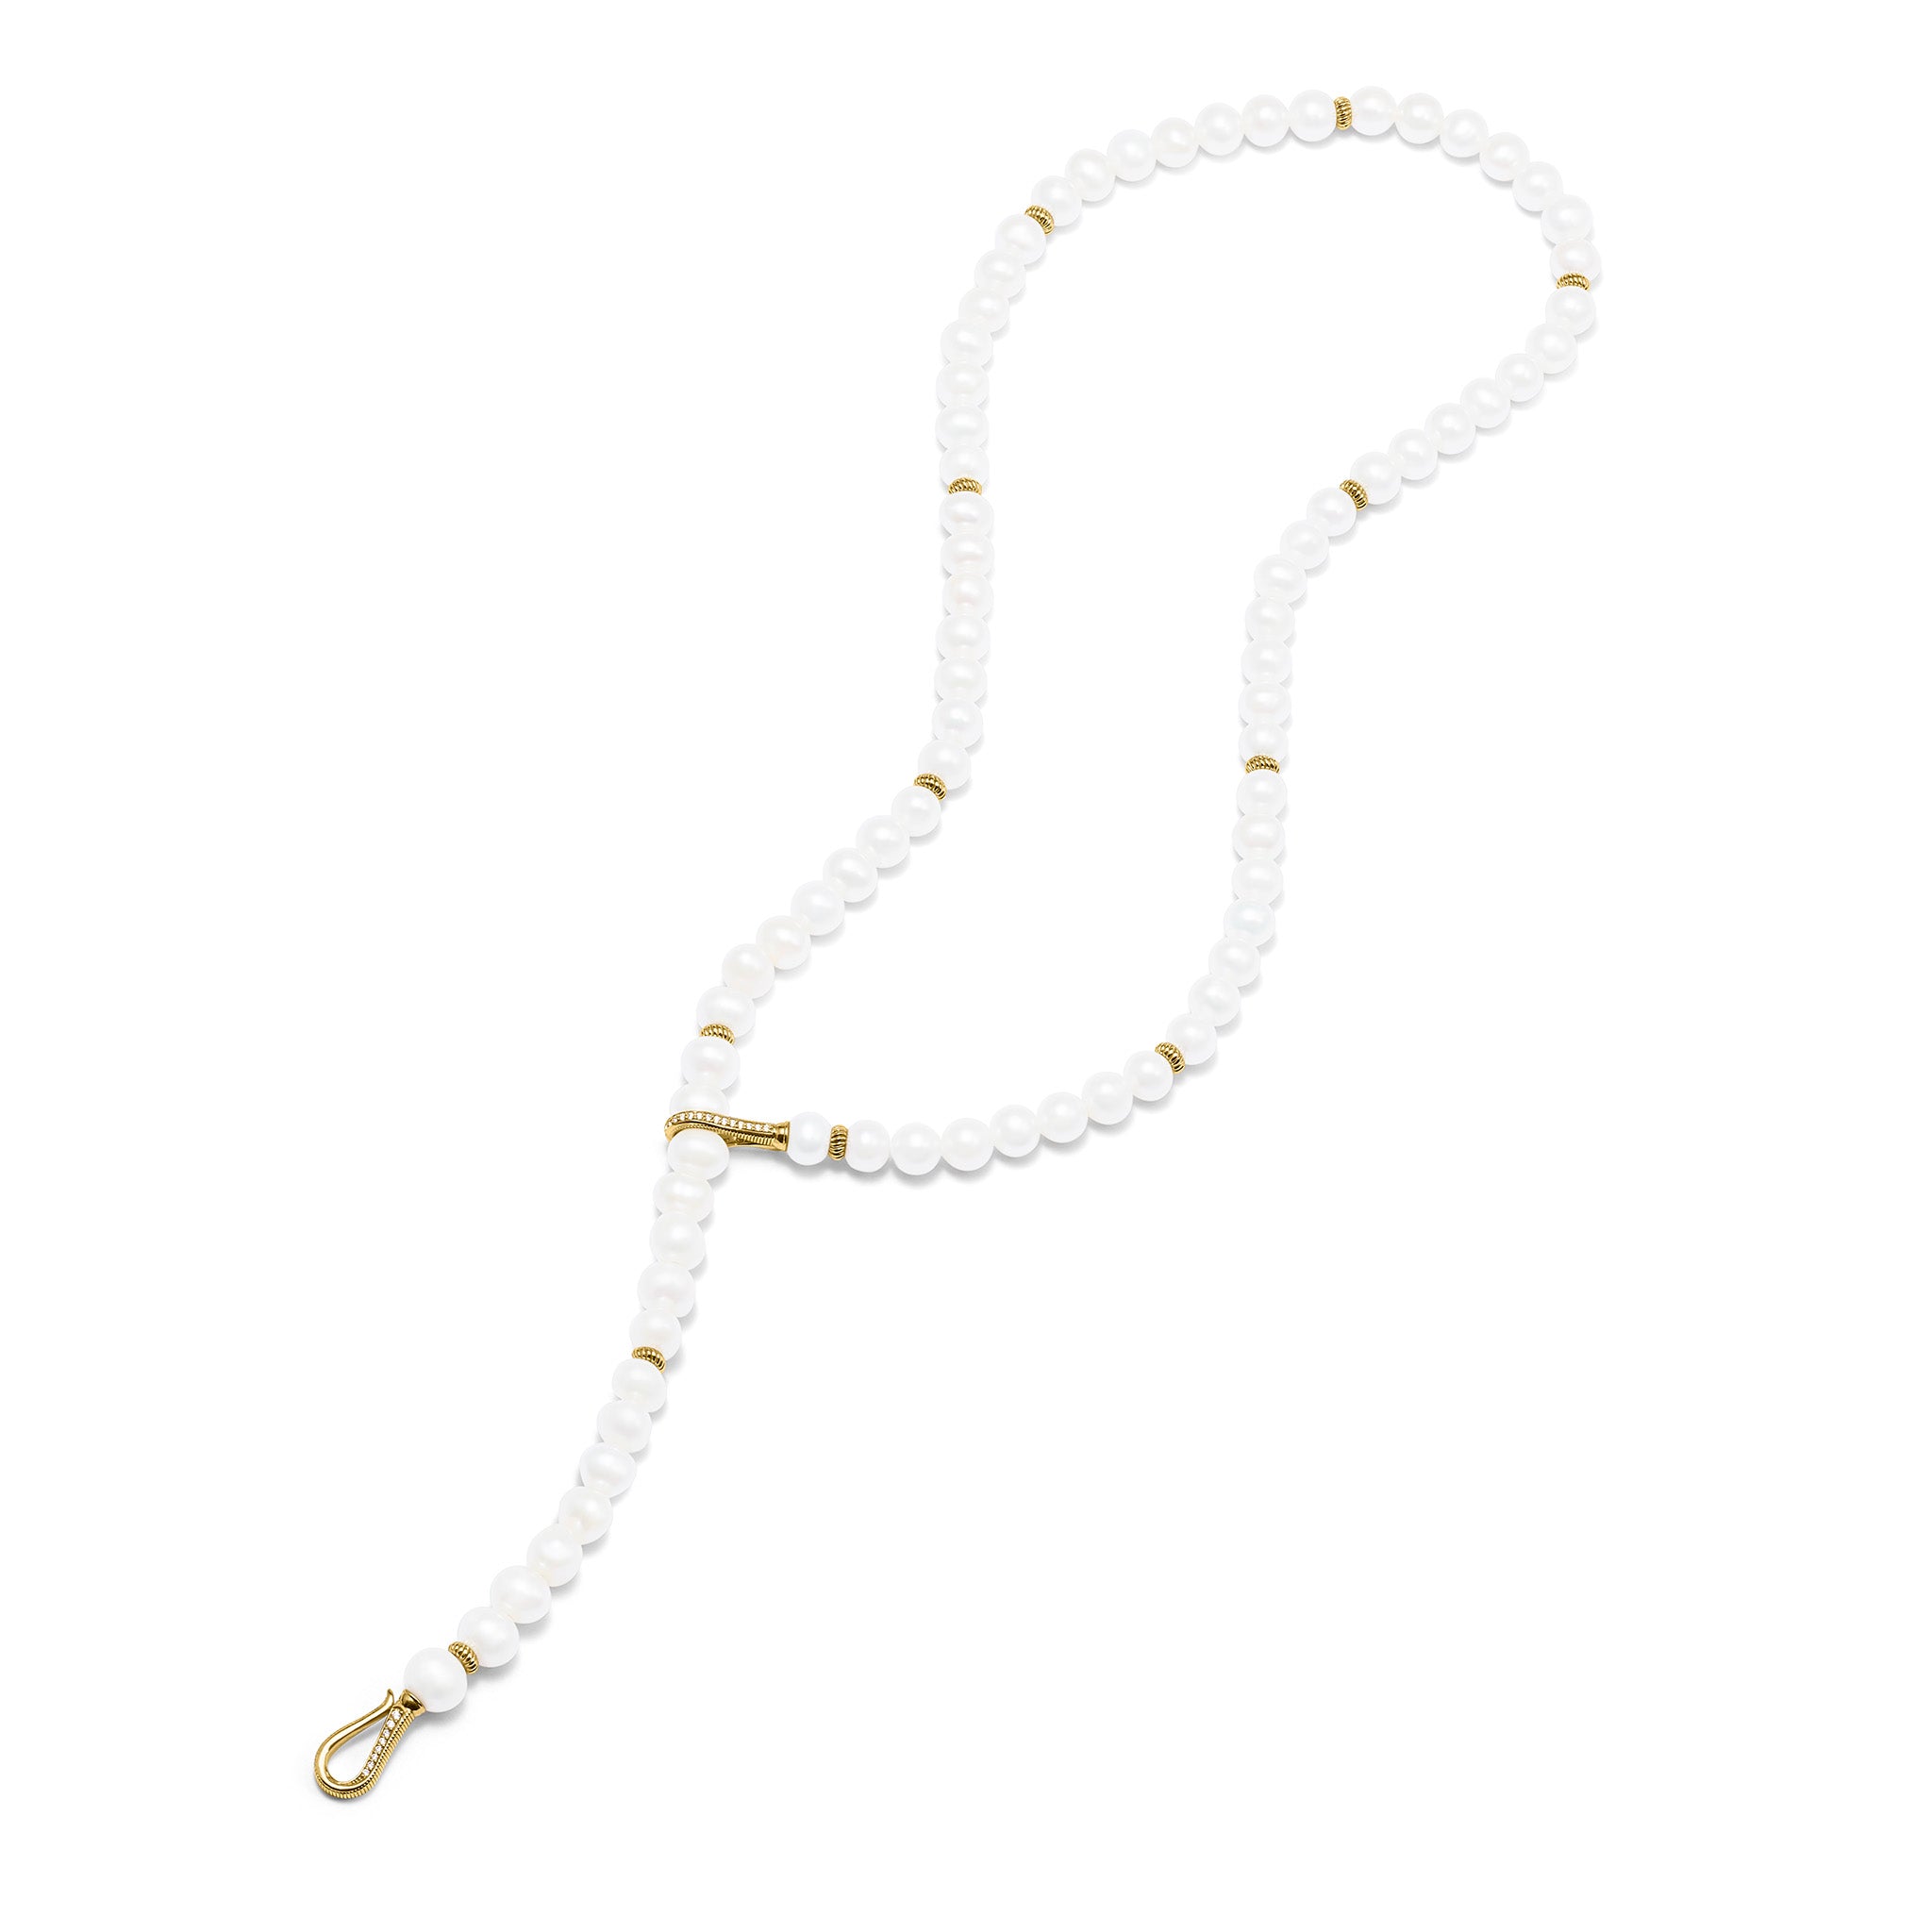 Shima Double Hook Drop Necklace with Freshwater Pearls and Diamonds in 18K